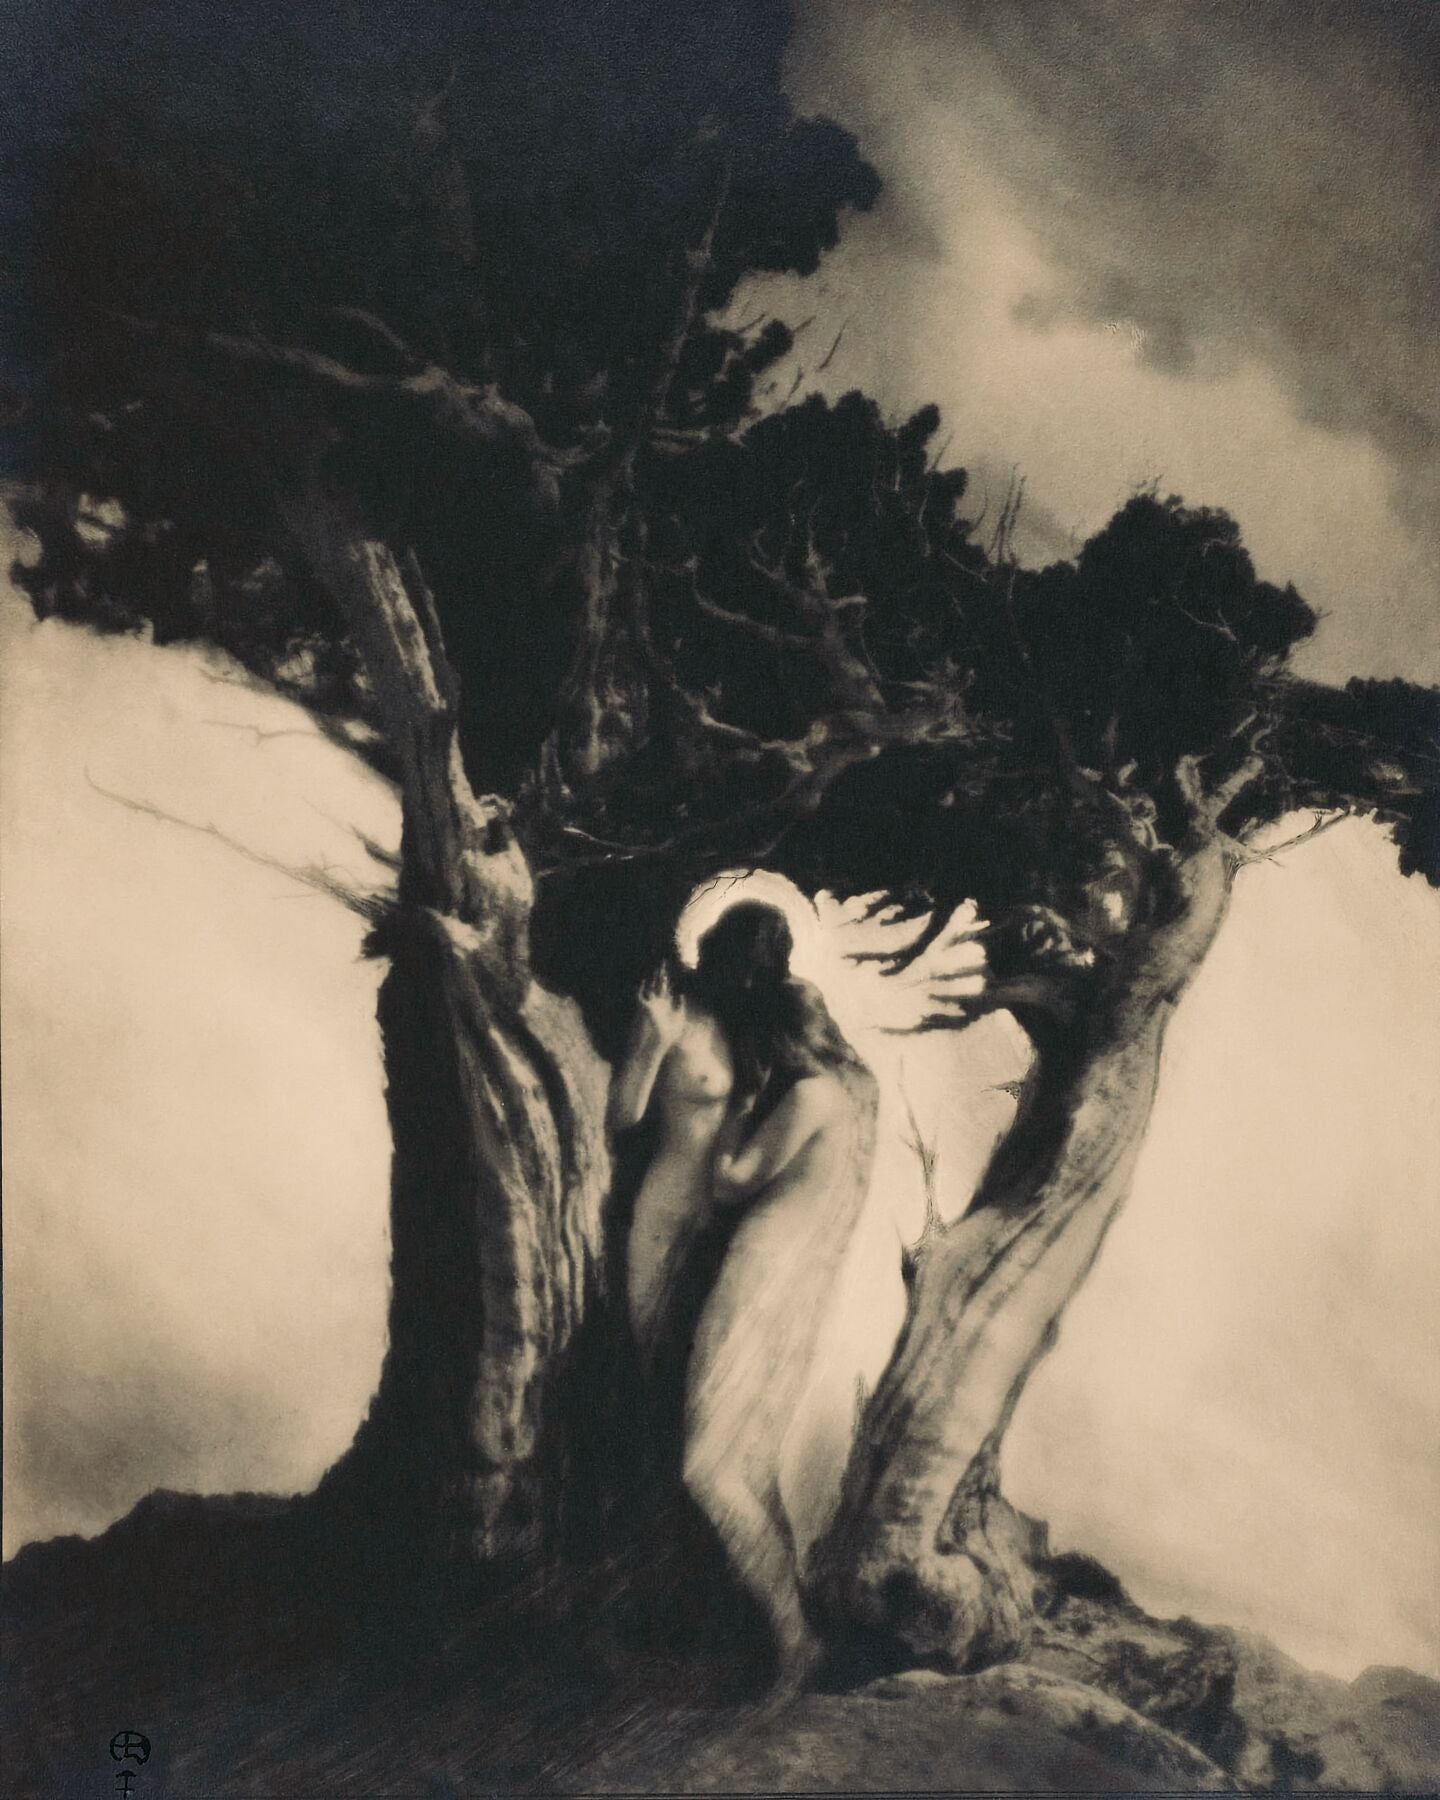 Heart of the Storm by Anne Brigman - c.1912